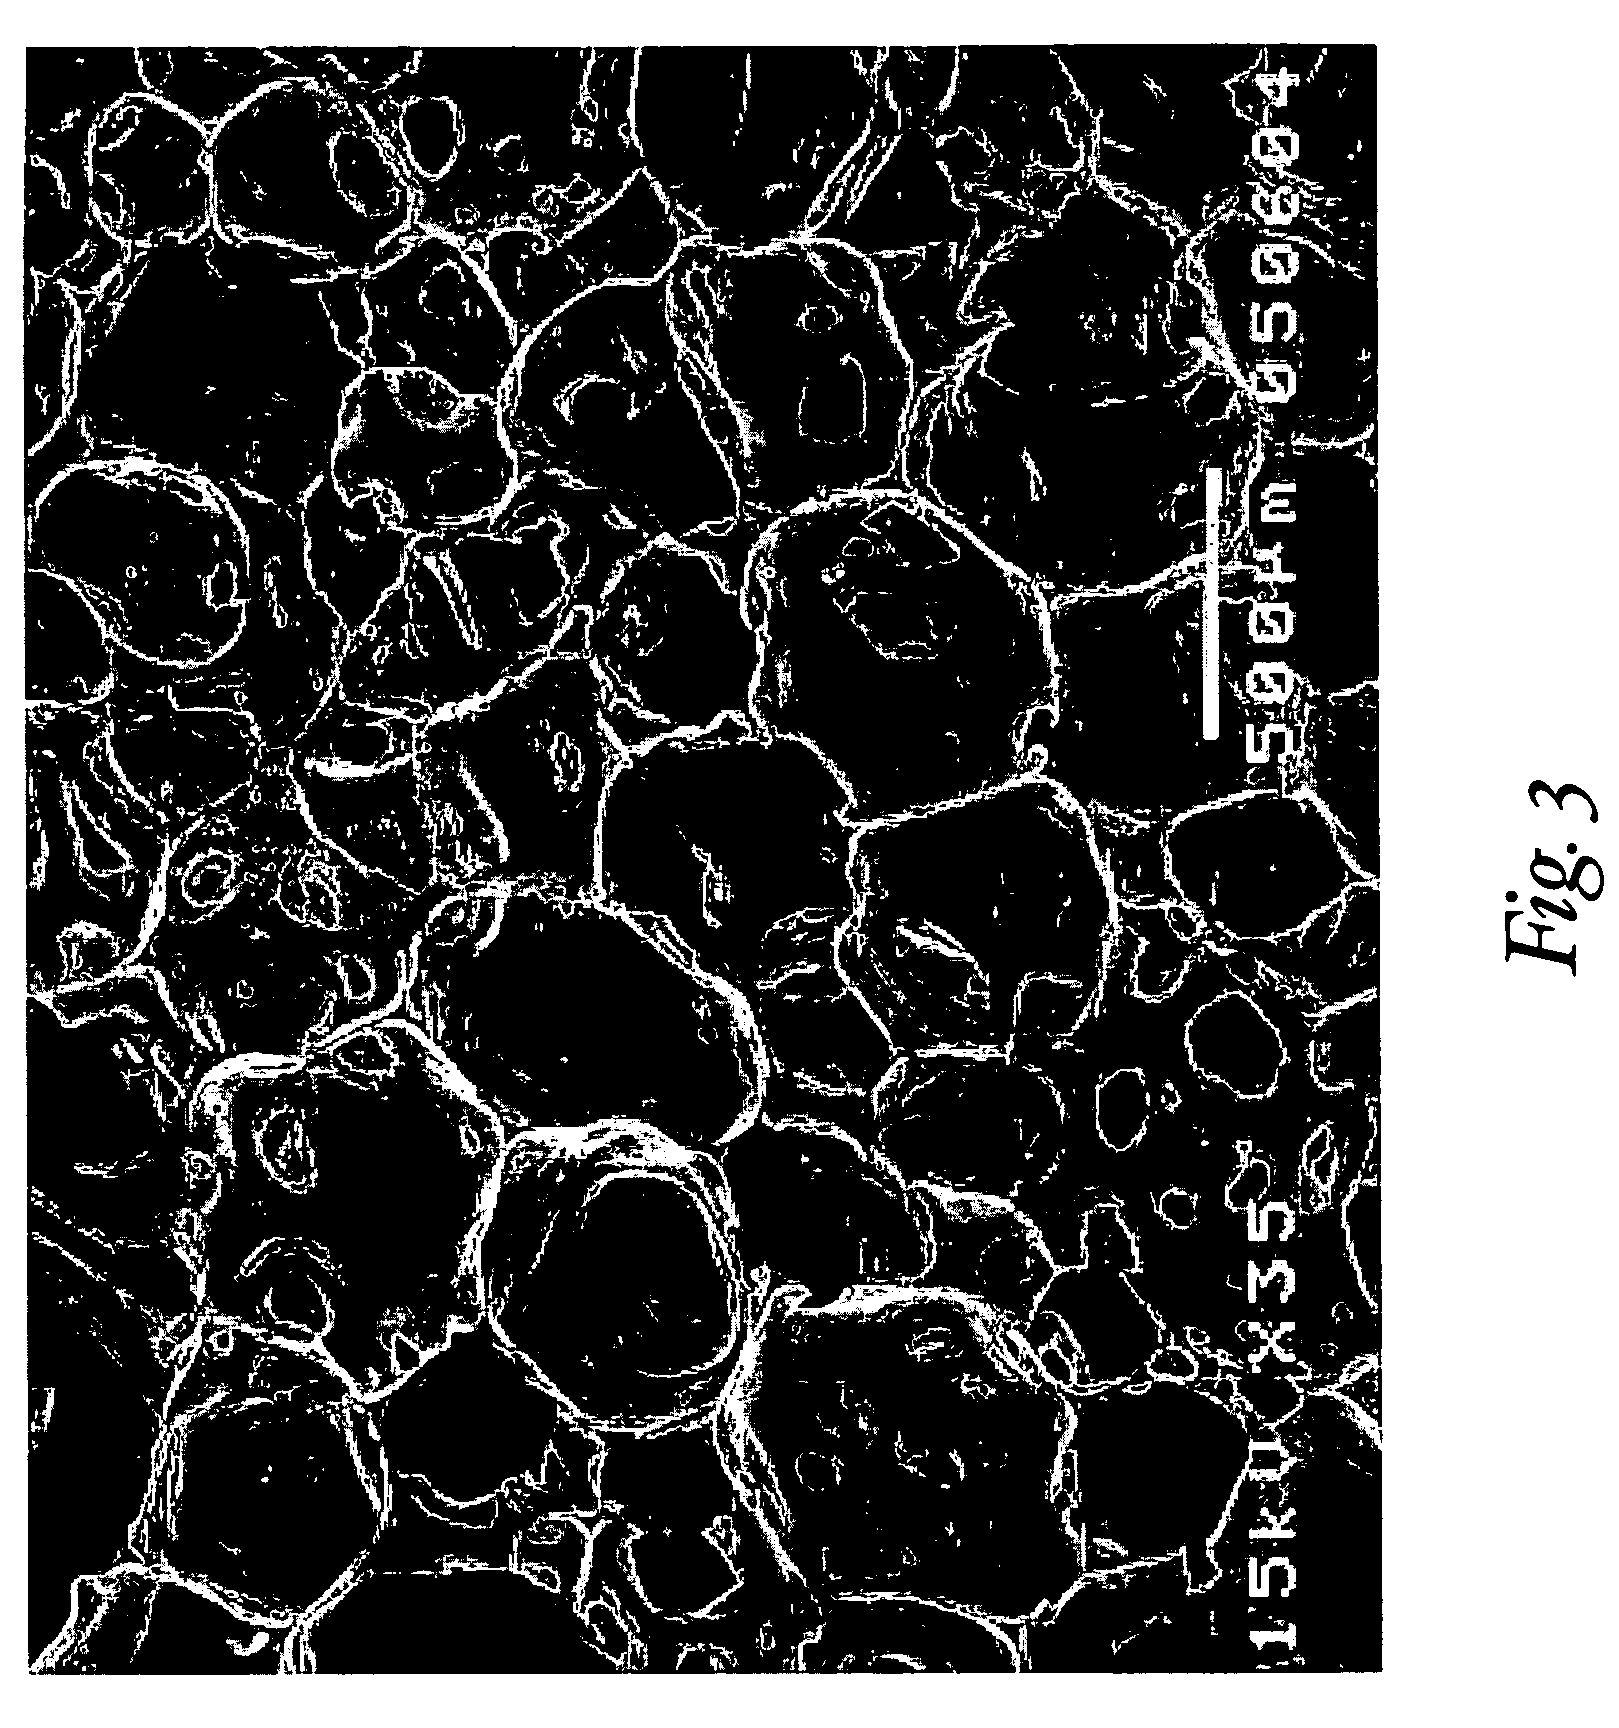 Reticulated elastomeric matrices, their manufacture and use in implantable devices